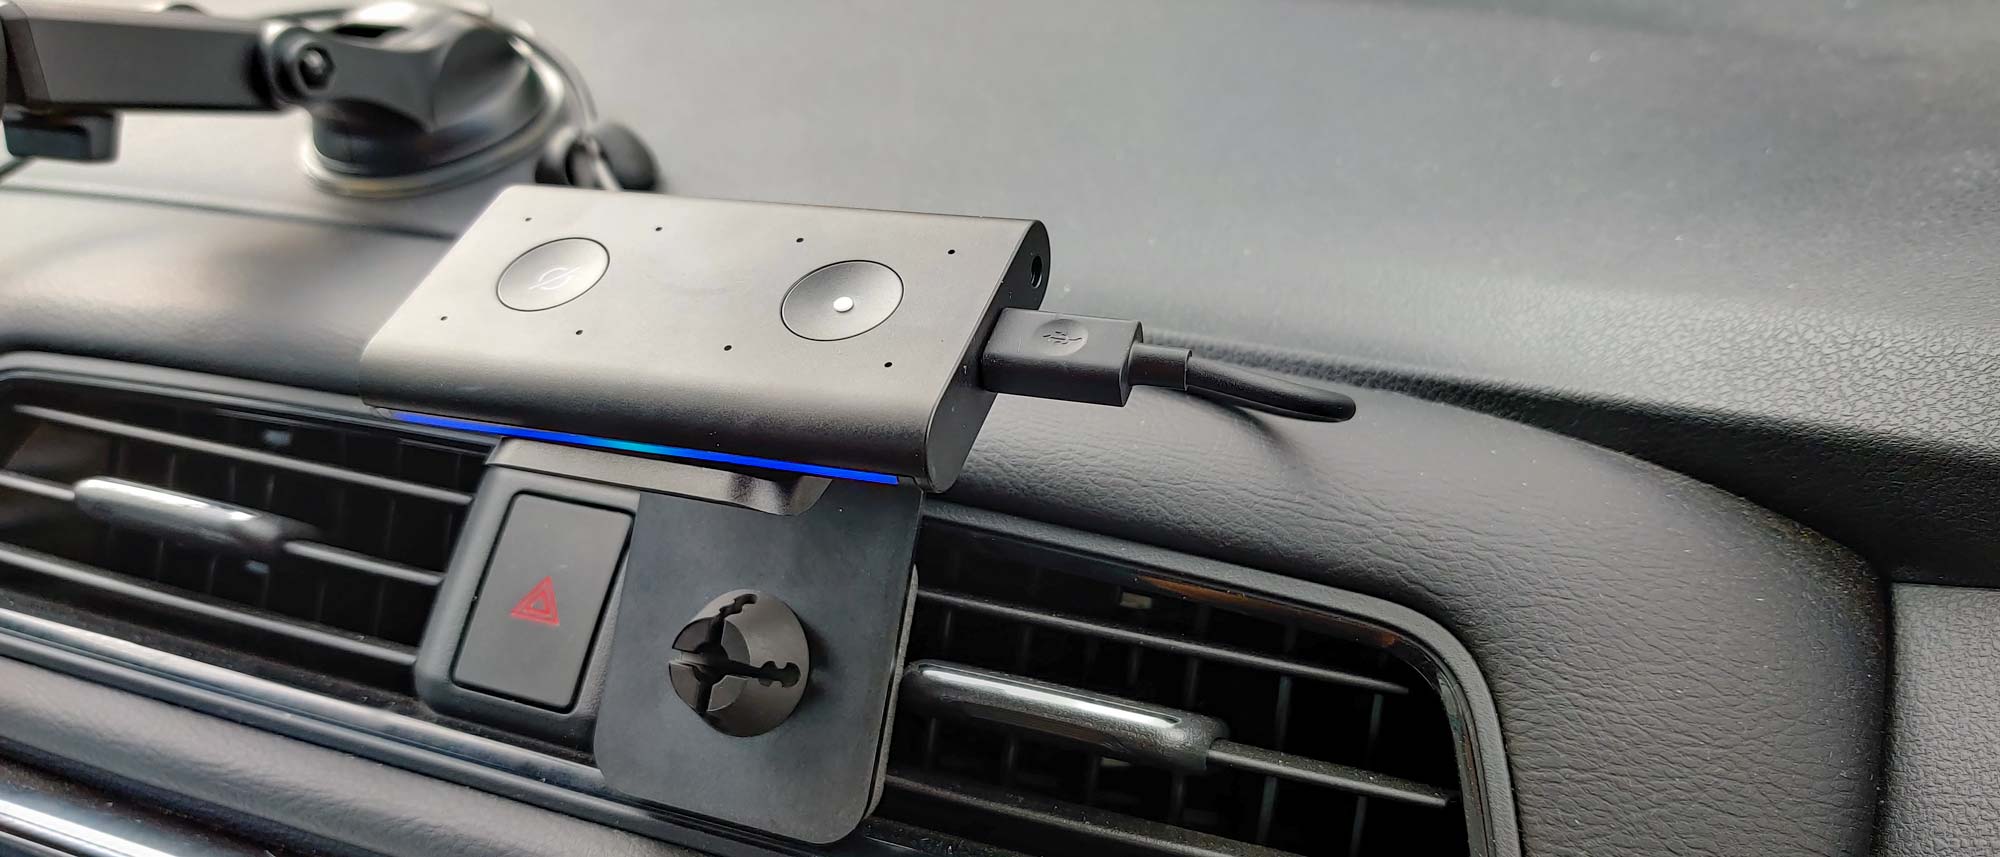 Echo Auto review: “Alexa, why do I need you in my car?”